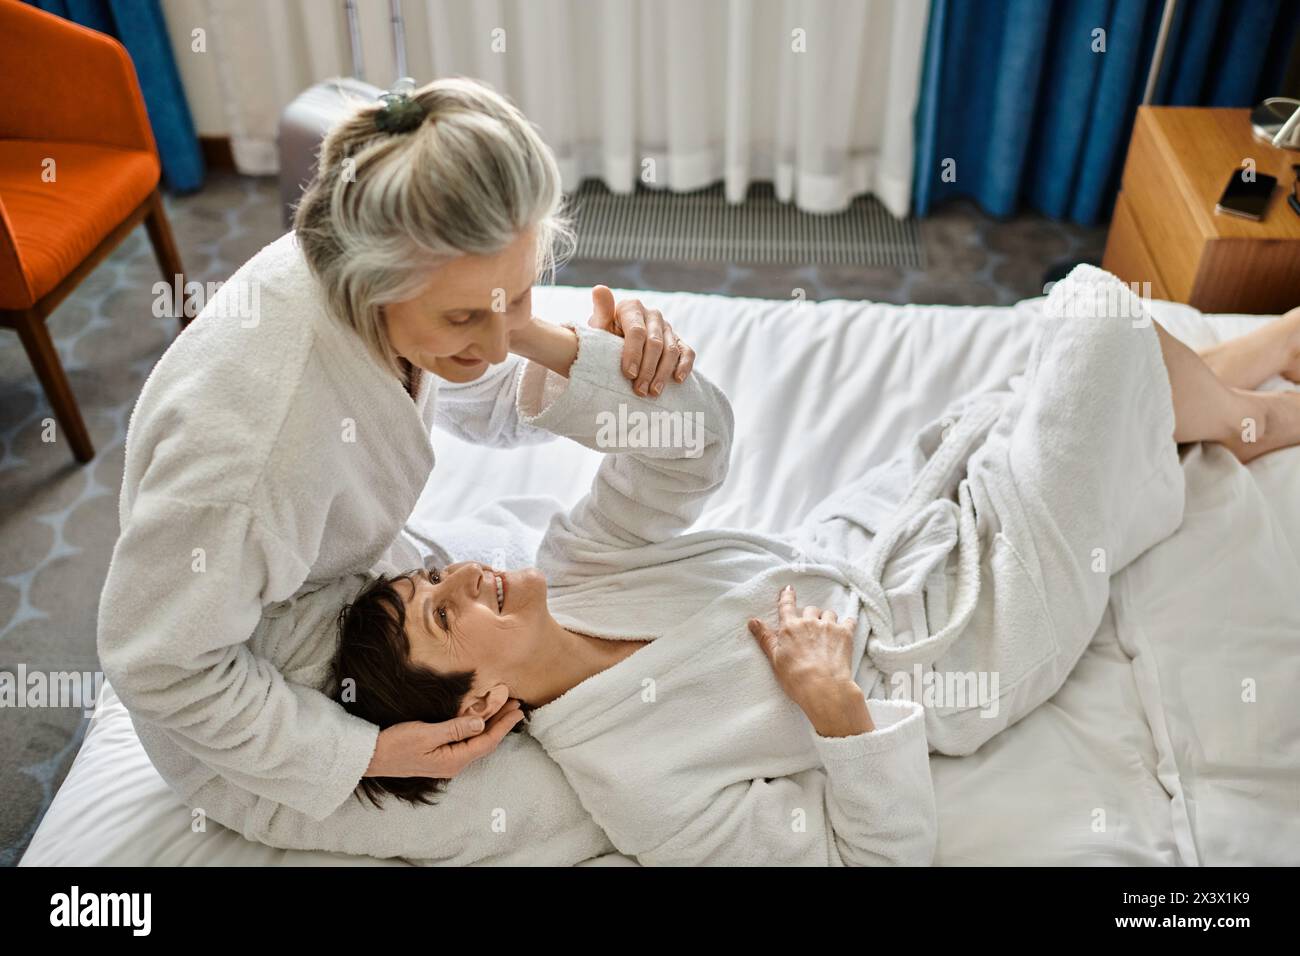 Senior lesbian couple tenderly laying together on a bed. Stock Photo